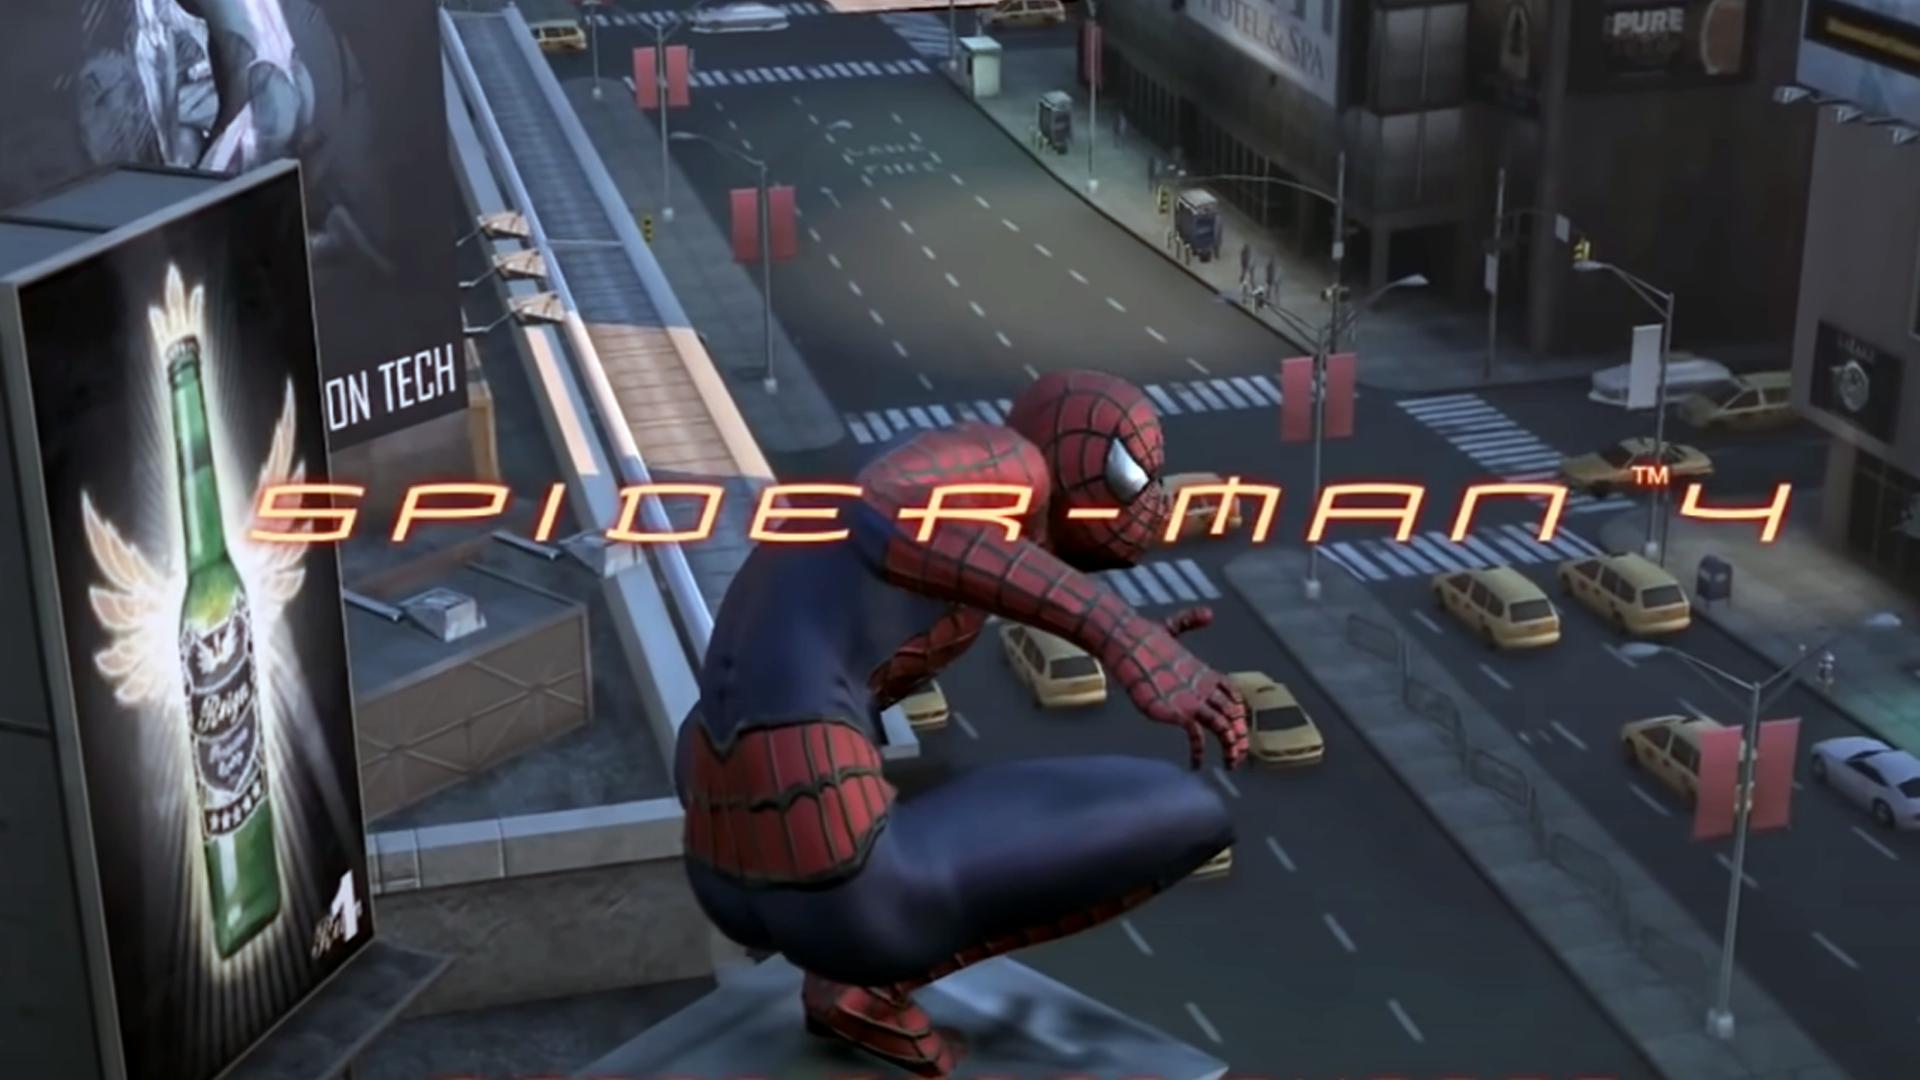 The “Amazing” Spider-Man Video Game in 2023 